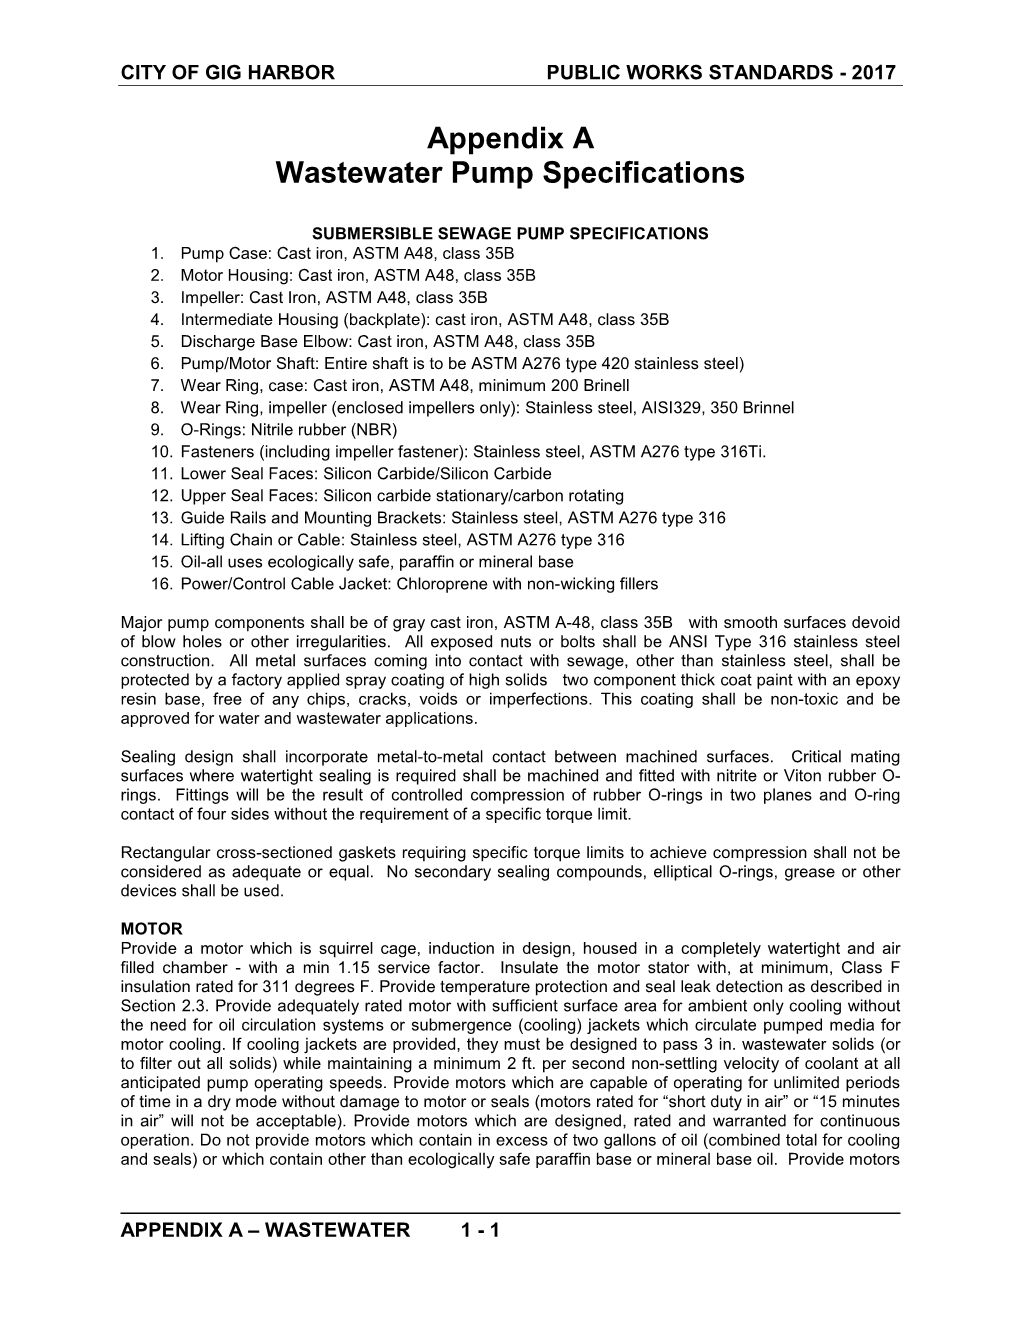 Appendix a Wastewater Pump Specifications